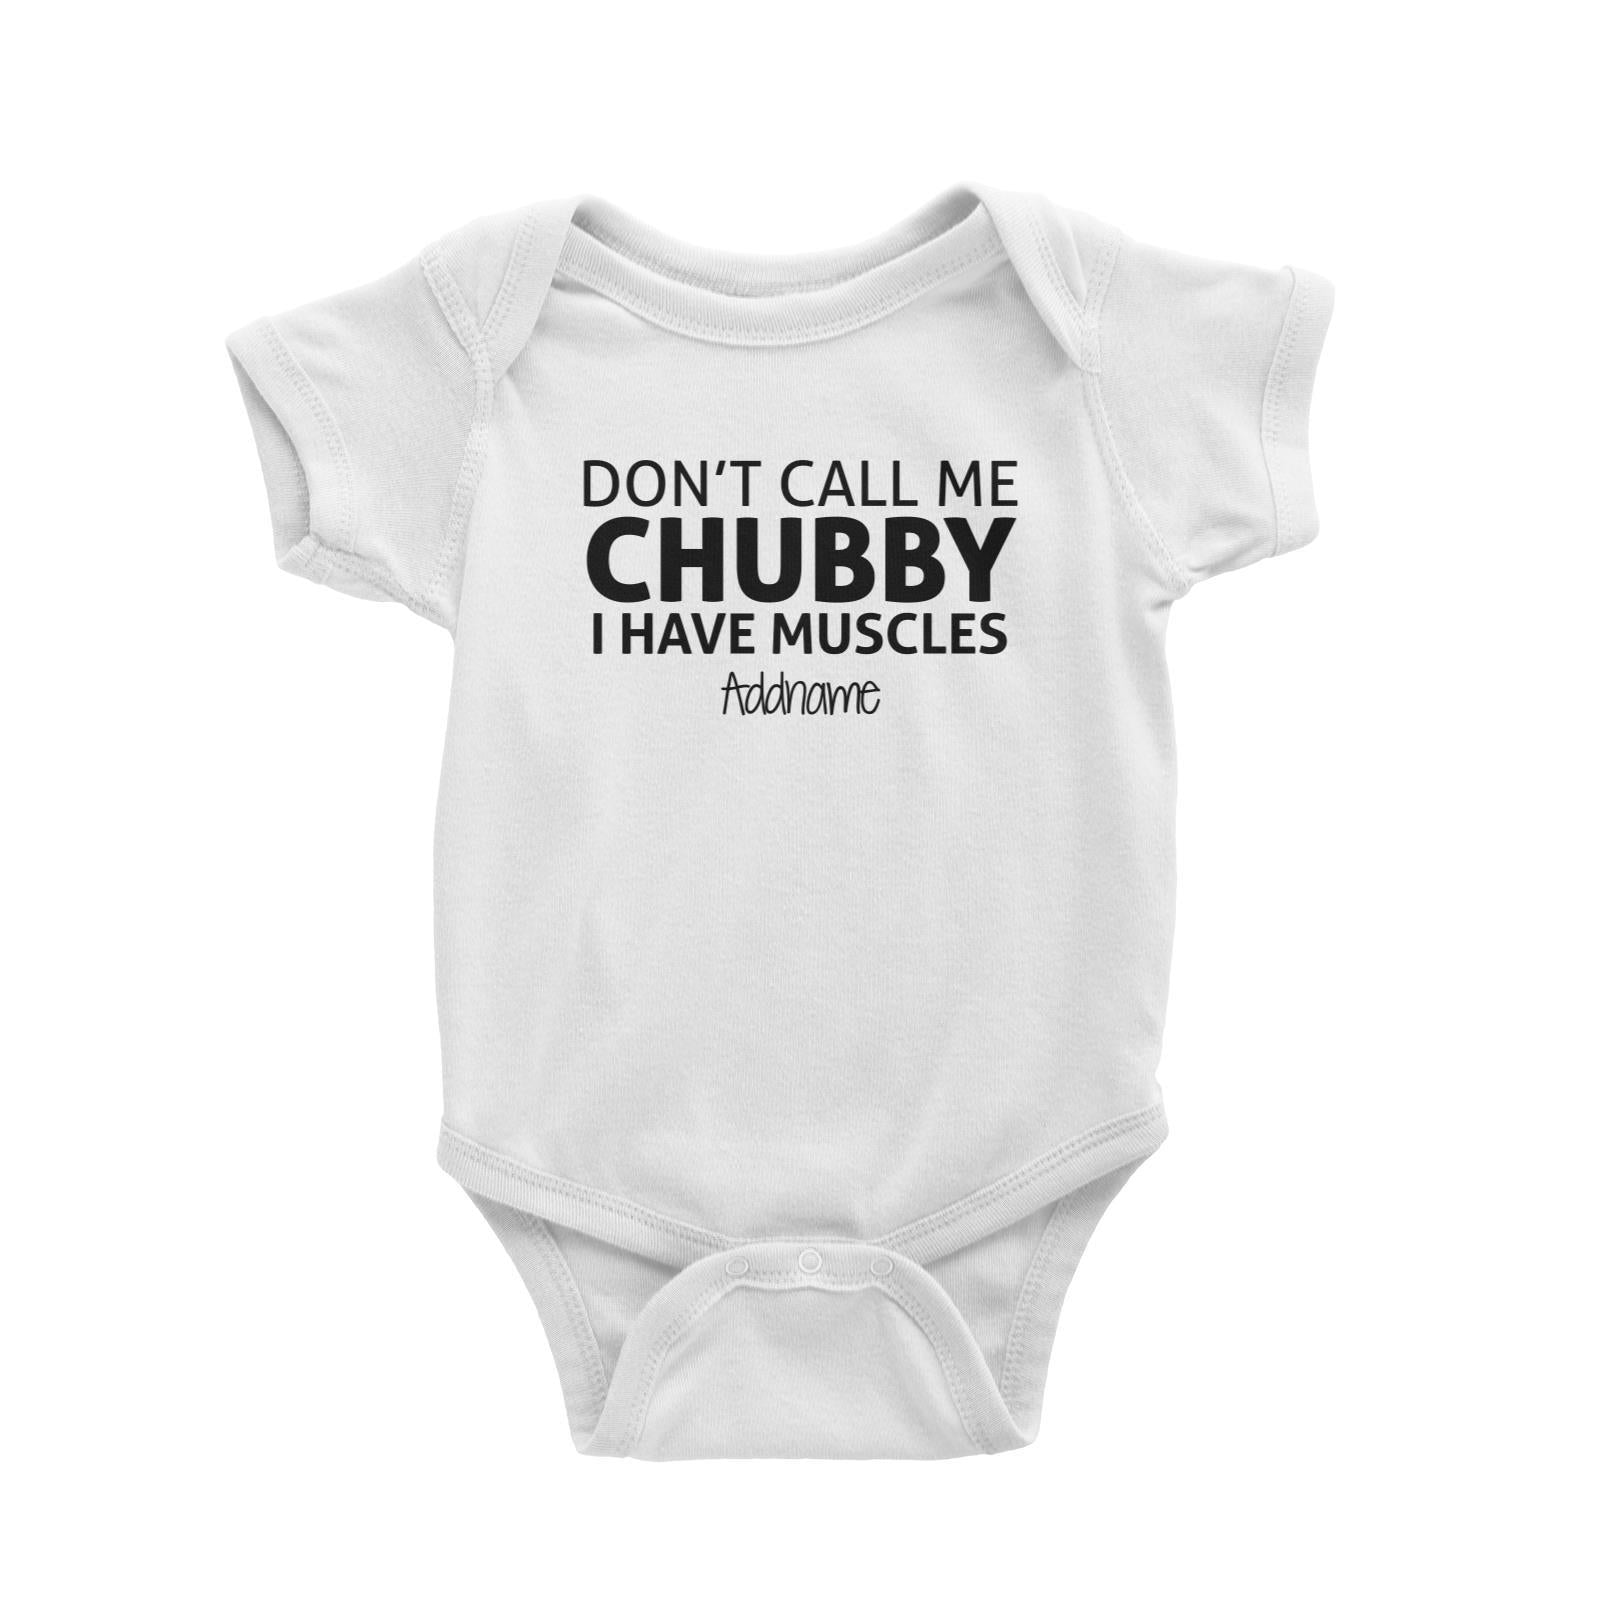 Dont Call Me Chubby I Have Muscles Addname Baby Romper